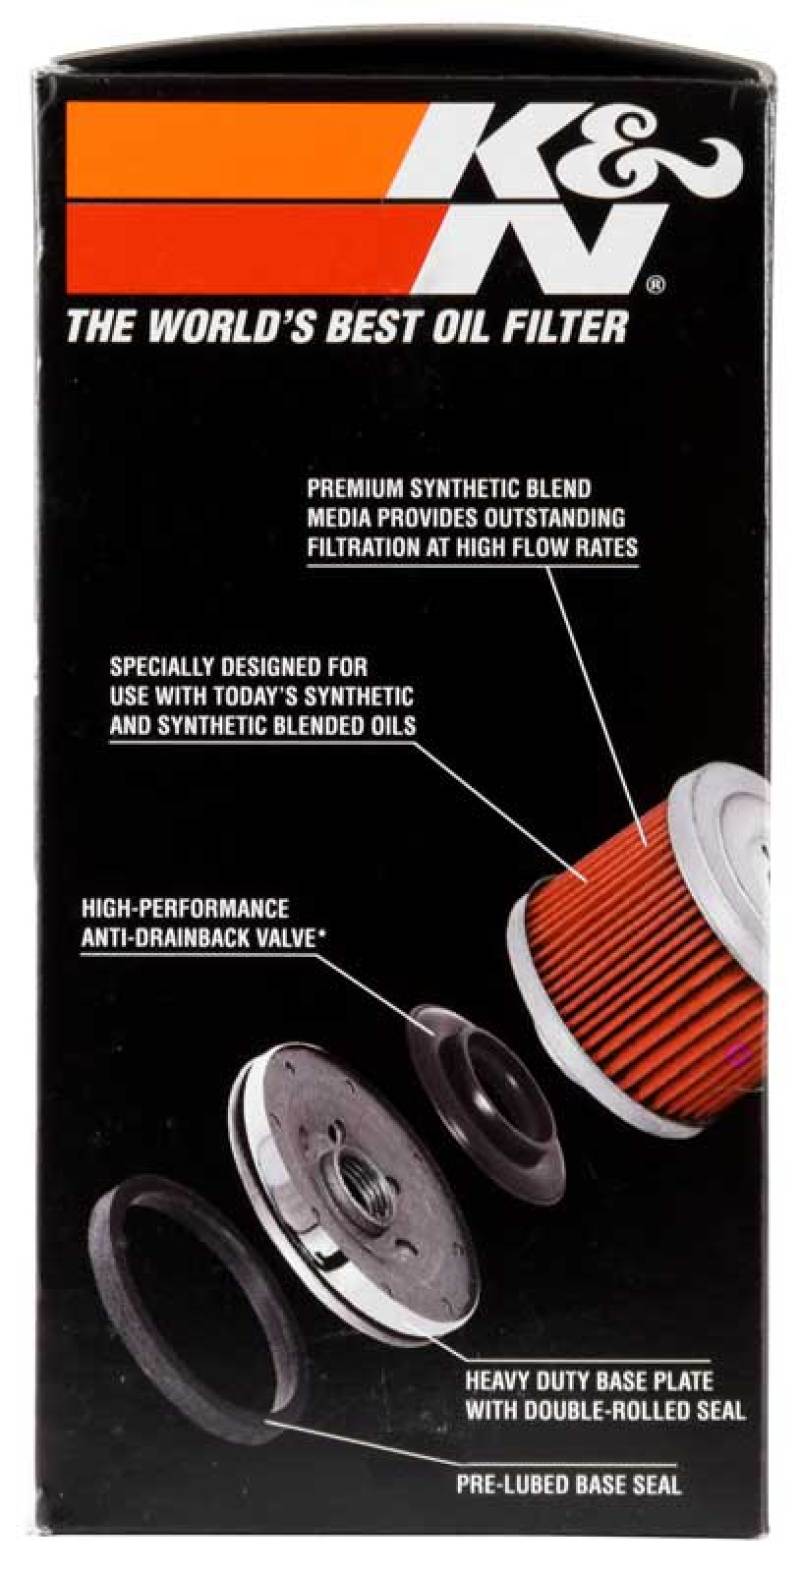 K&N Oil Filter 80-98 Harley Davidson FXB/FXD?FXDB/FXDC/FXDL/FXDS/FXDWG - 3in OD x 5.969in Height -  Shop now at Performance Car Parts